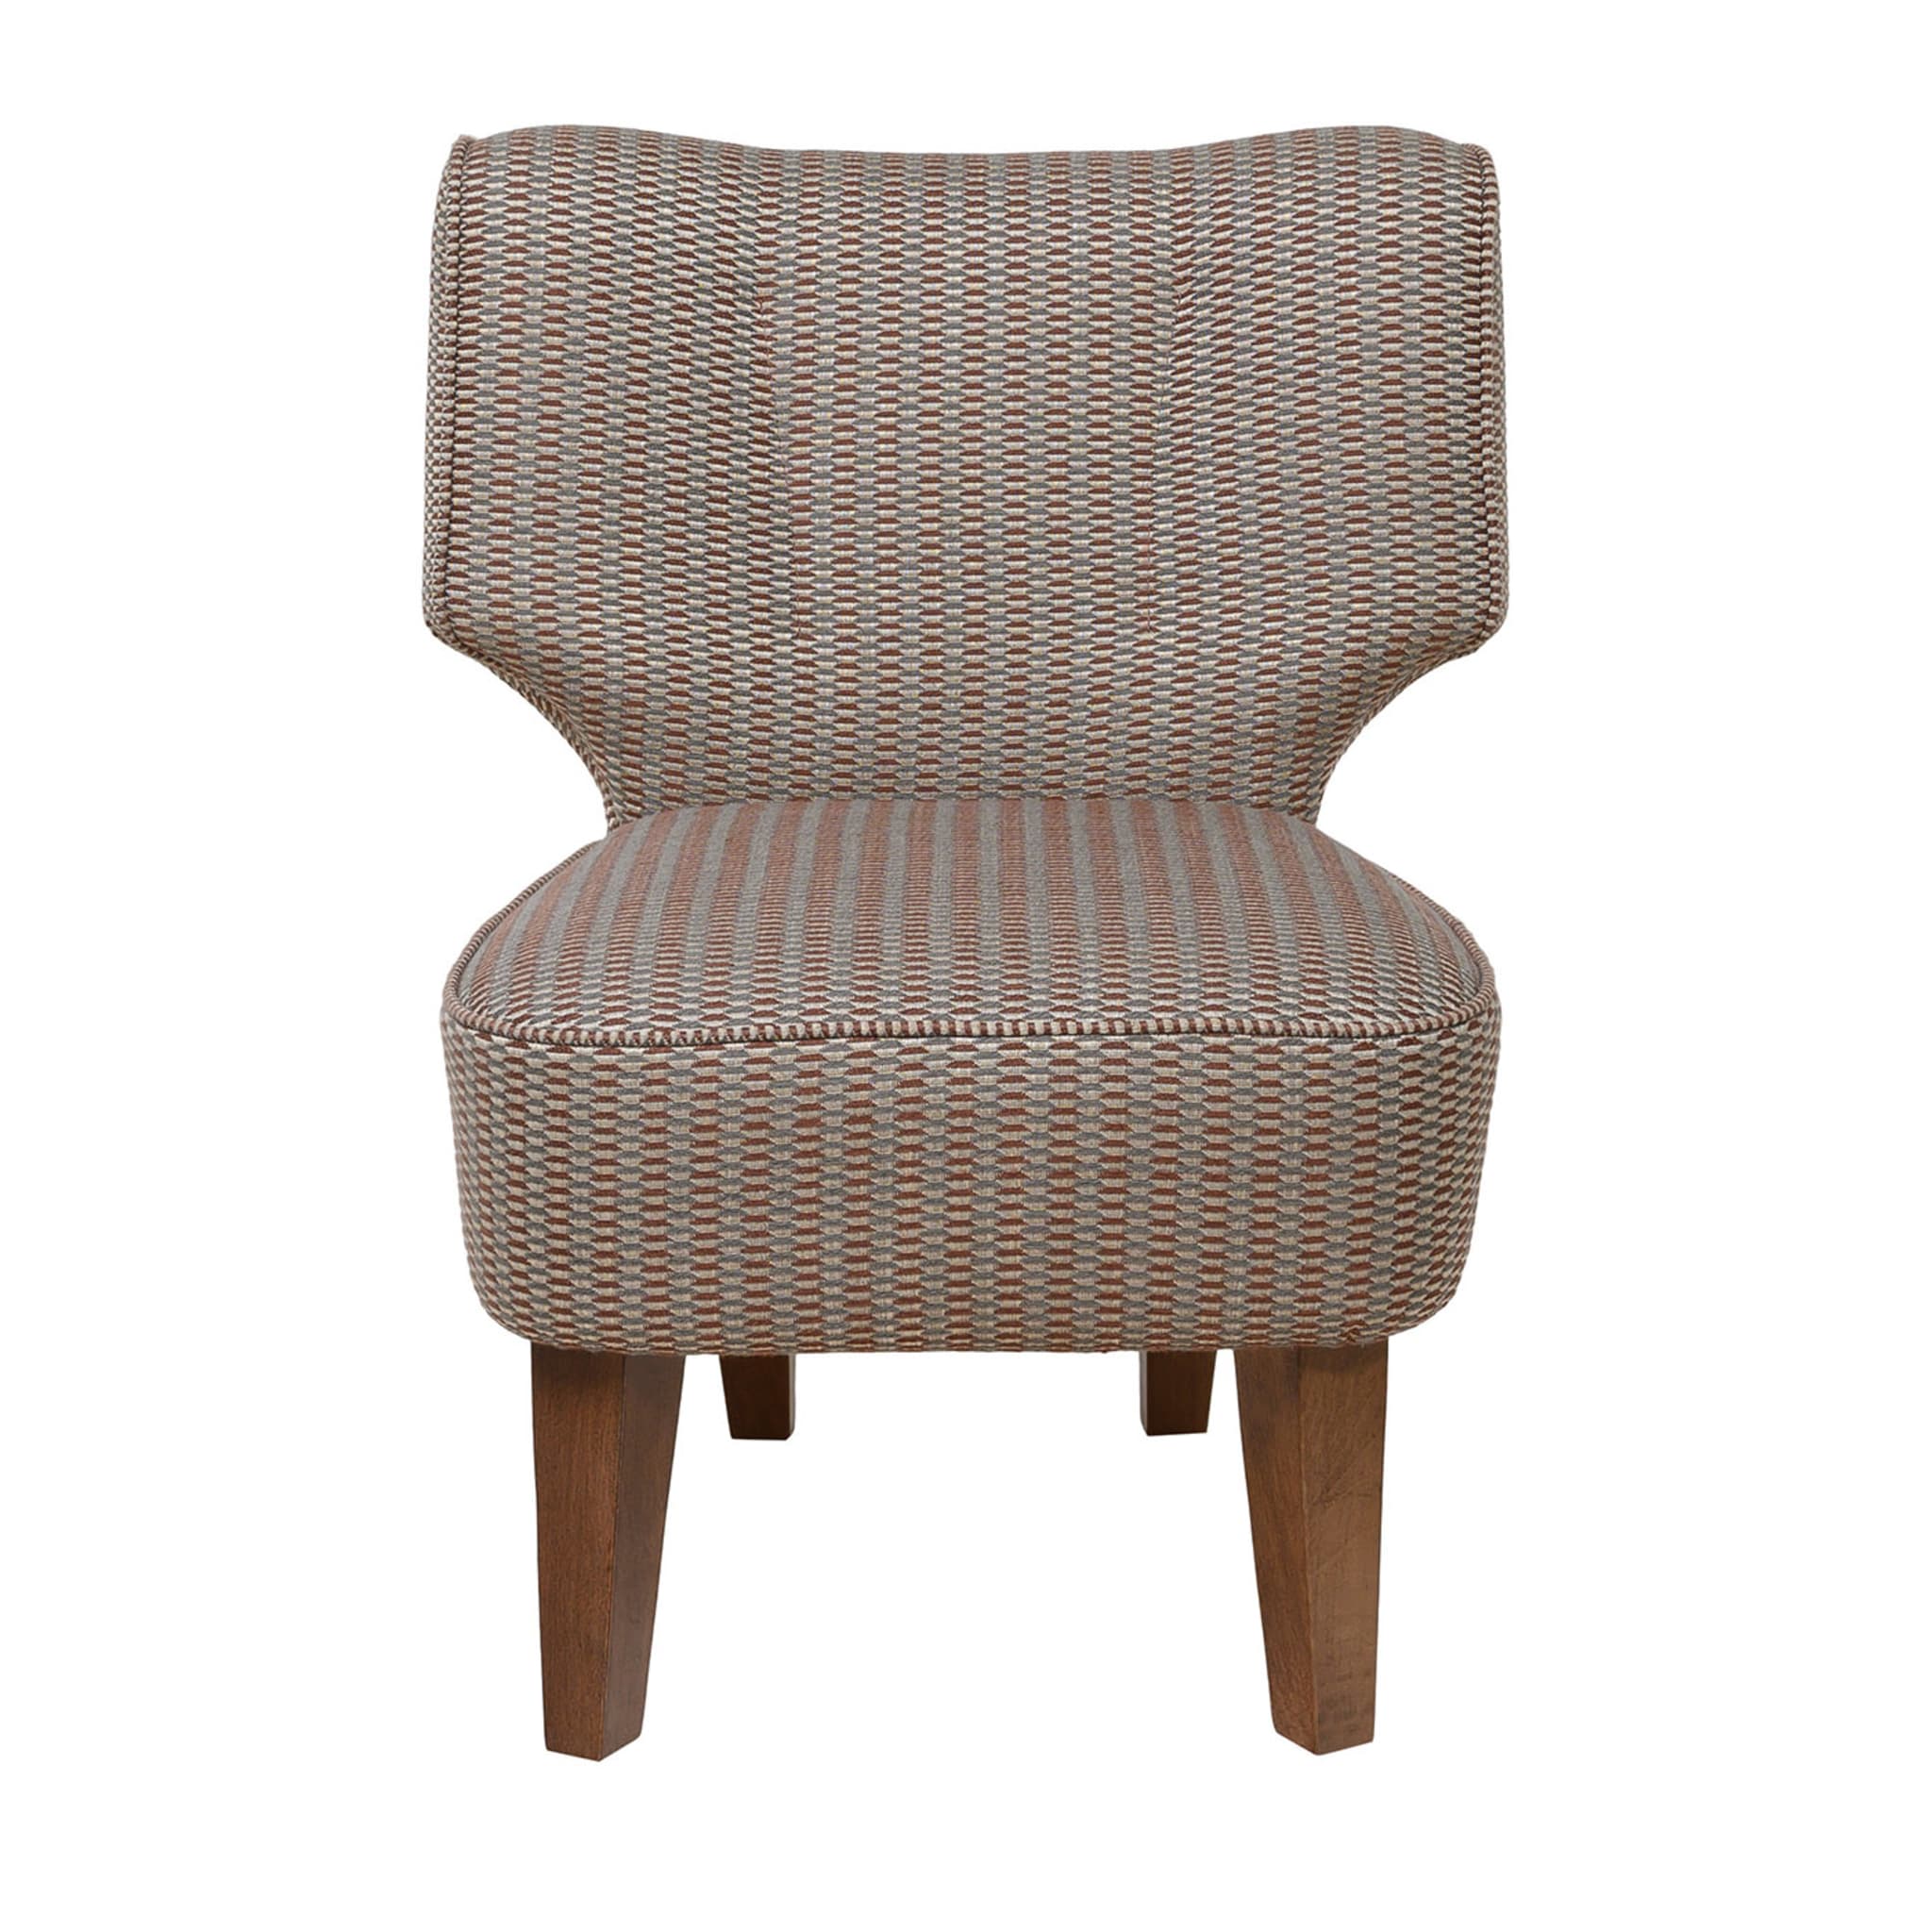 Mimosa Geometric-Patterned Chair - Main view